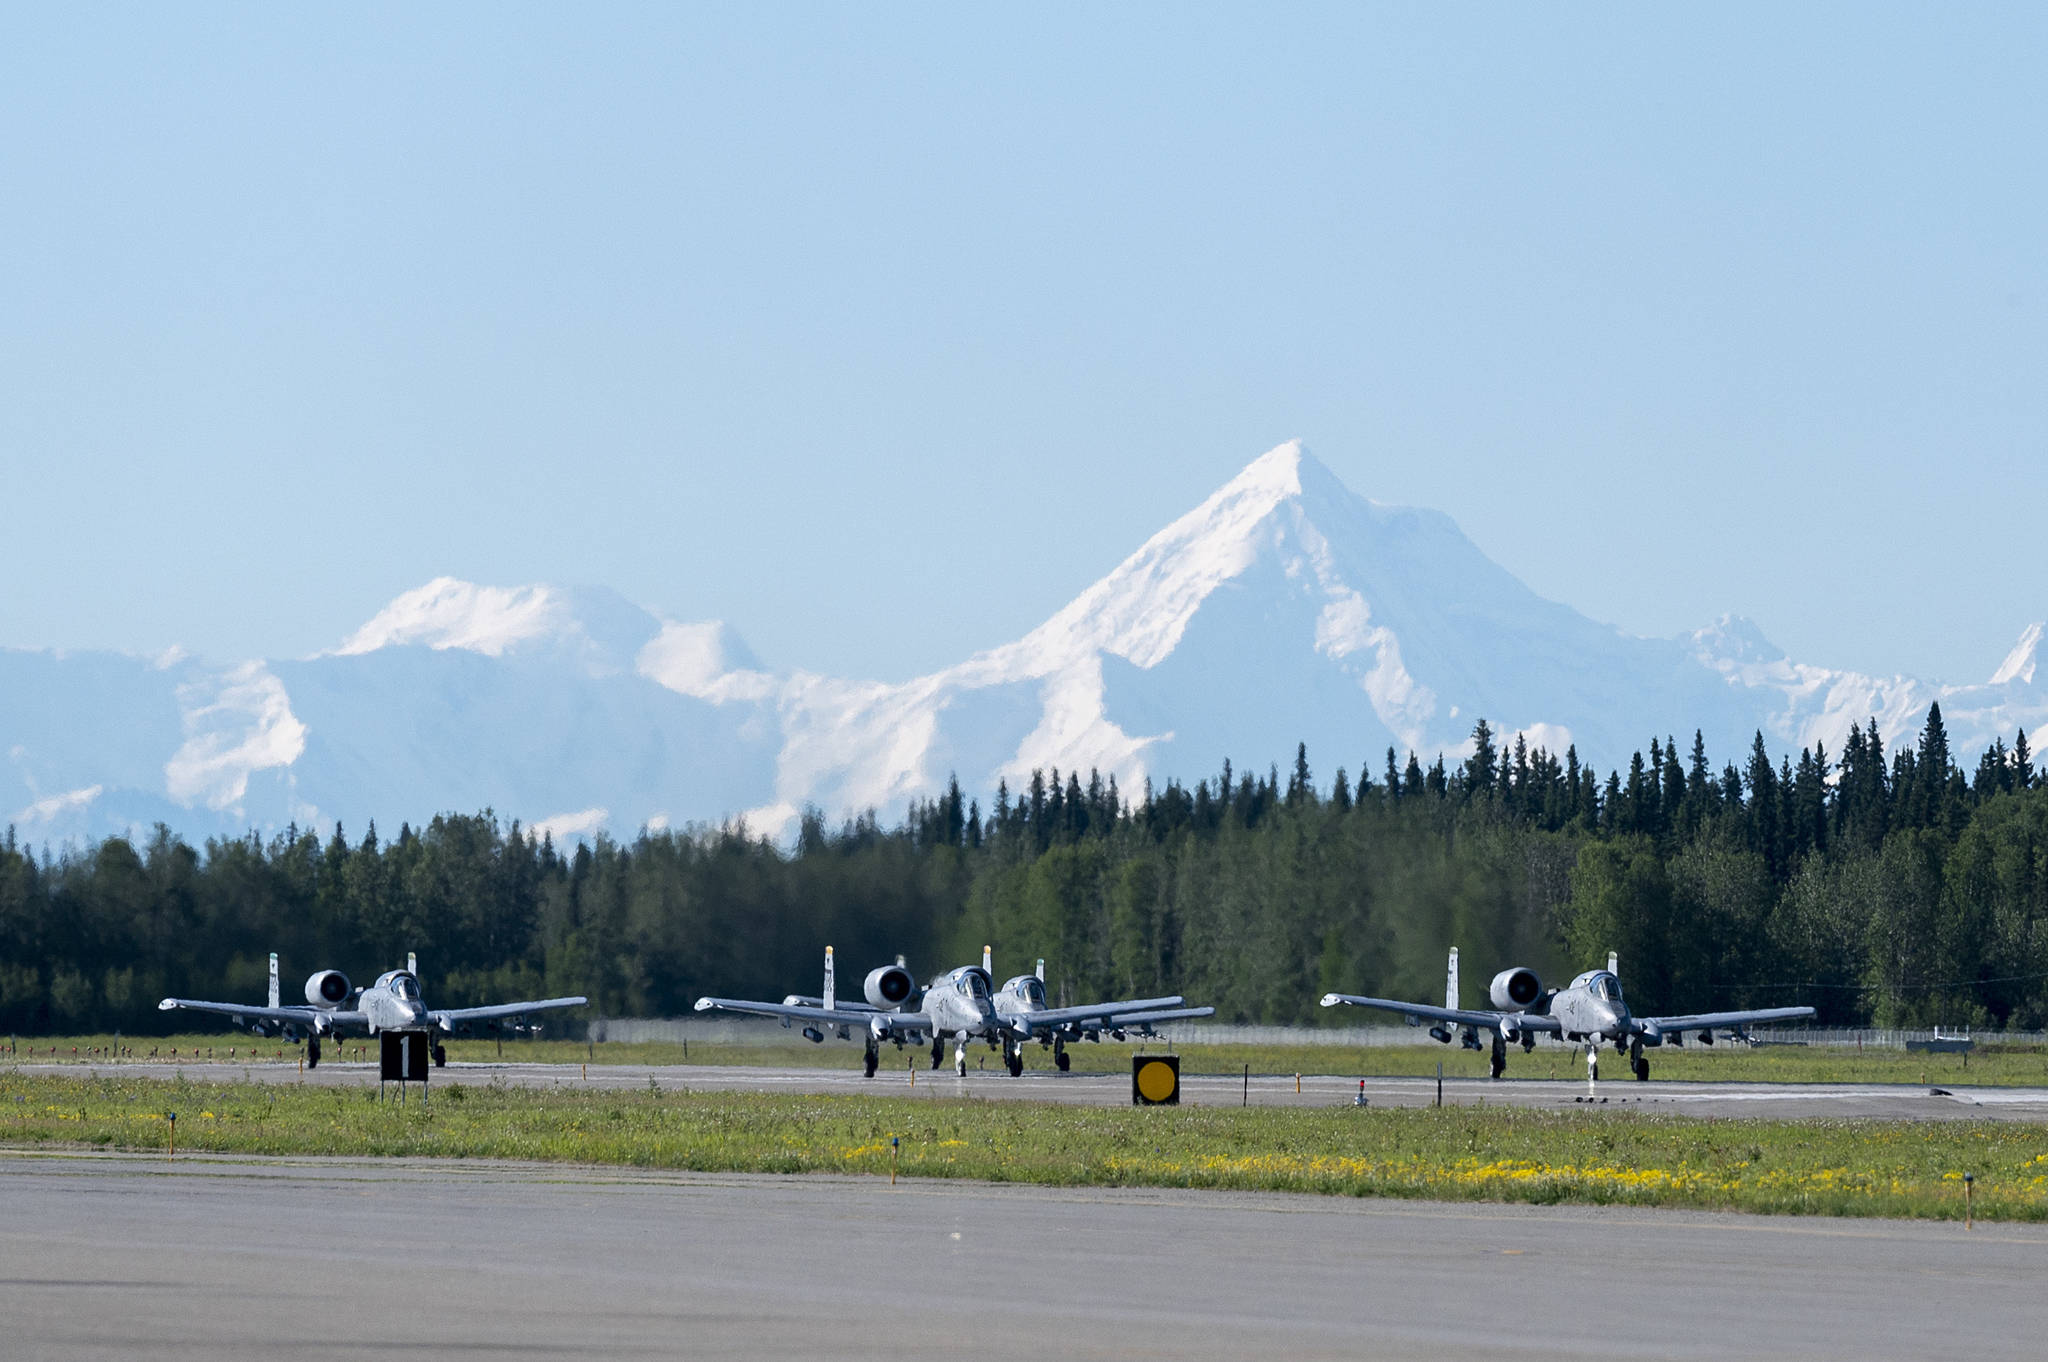 A-10 Thunderbolt II aircraft assigned to the 25th Fighter Squadron taxi during exercise Red Flag-Alaska 21-02 at Eielson Air Force Base, Alaska, June 14, 2021. (Tech. Sgt. Peter Thompson / U.S. Air Force)